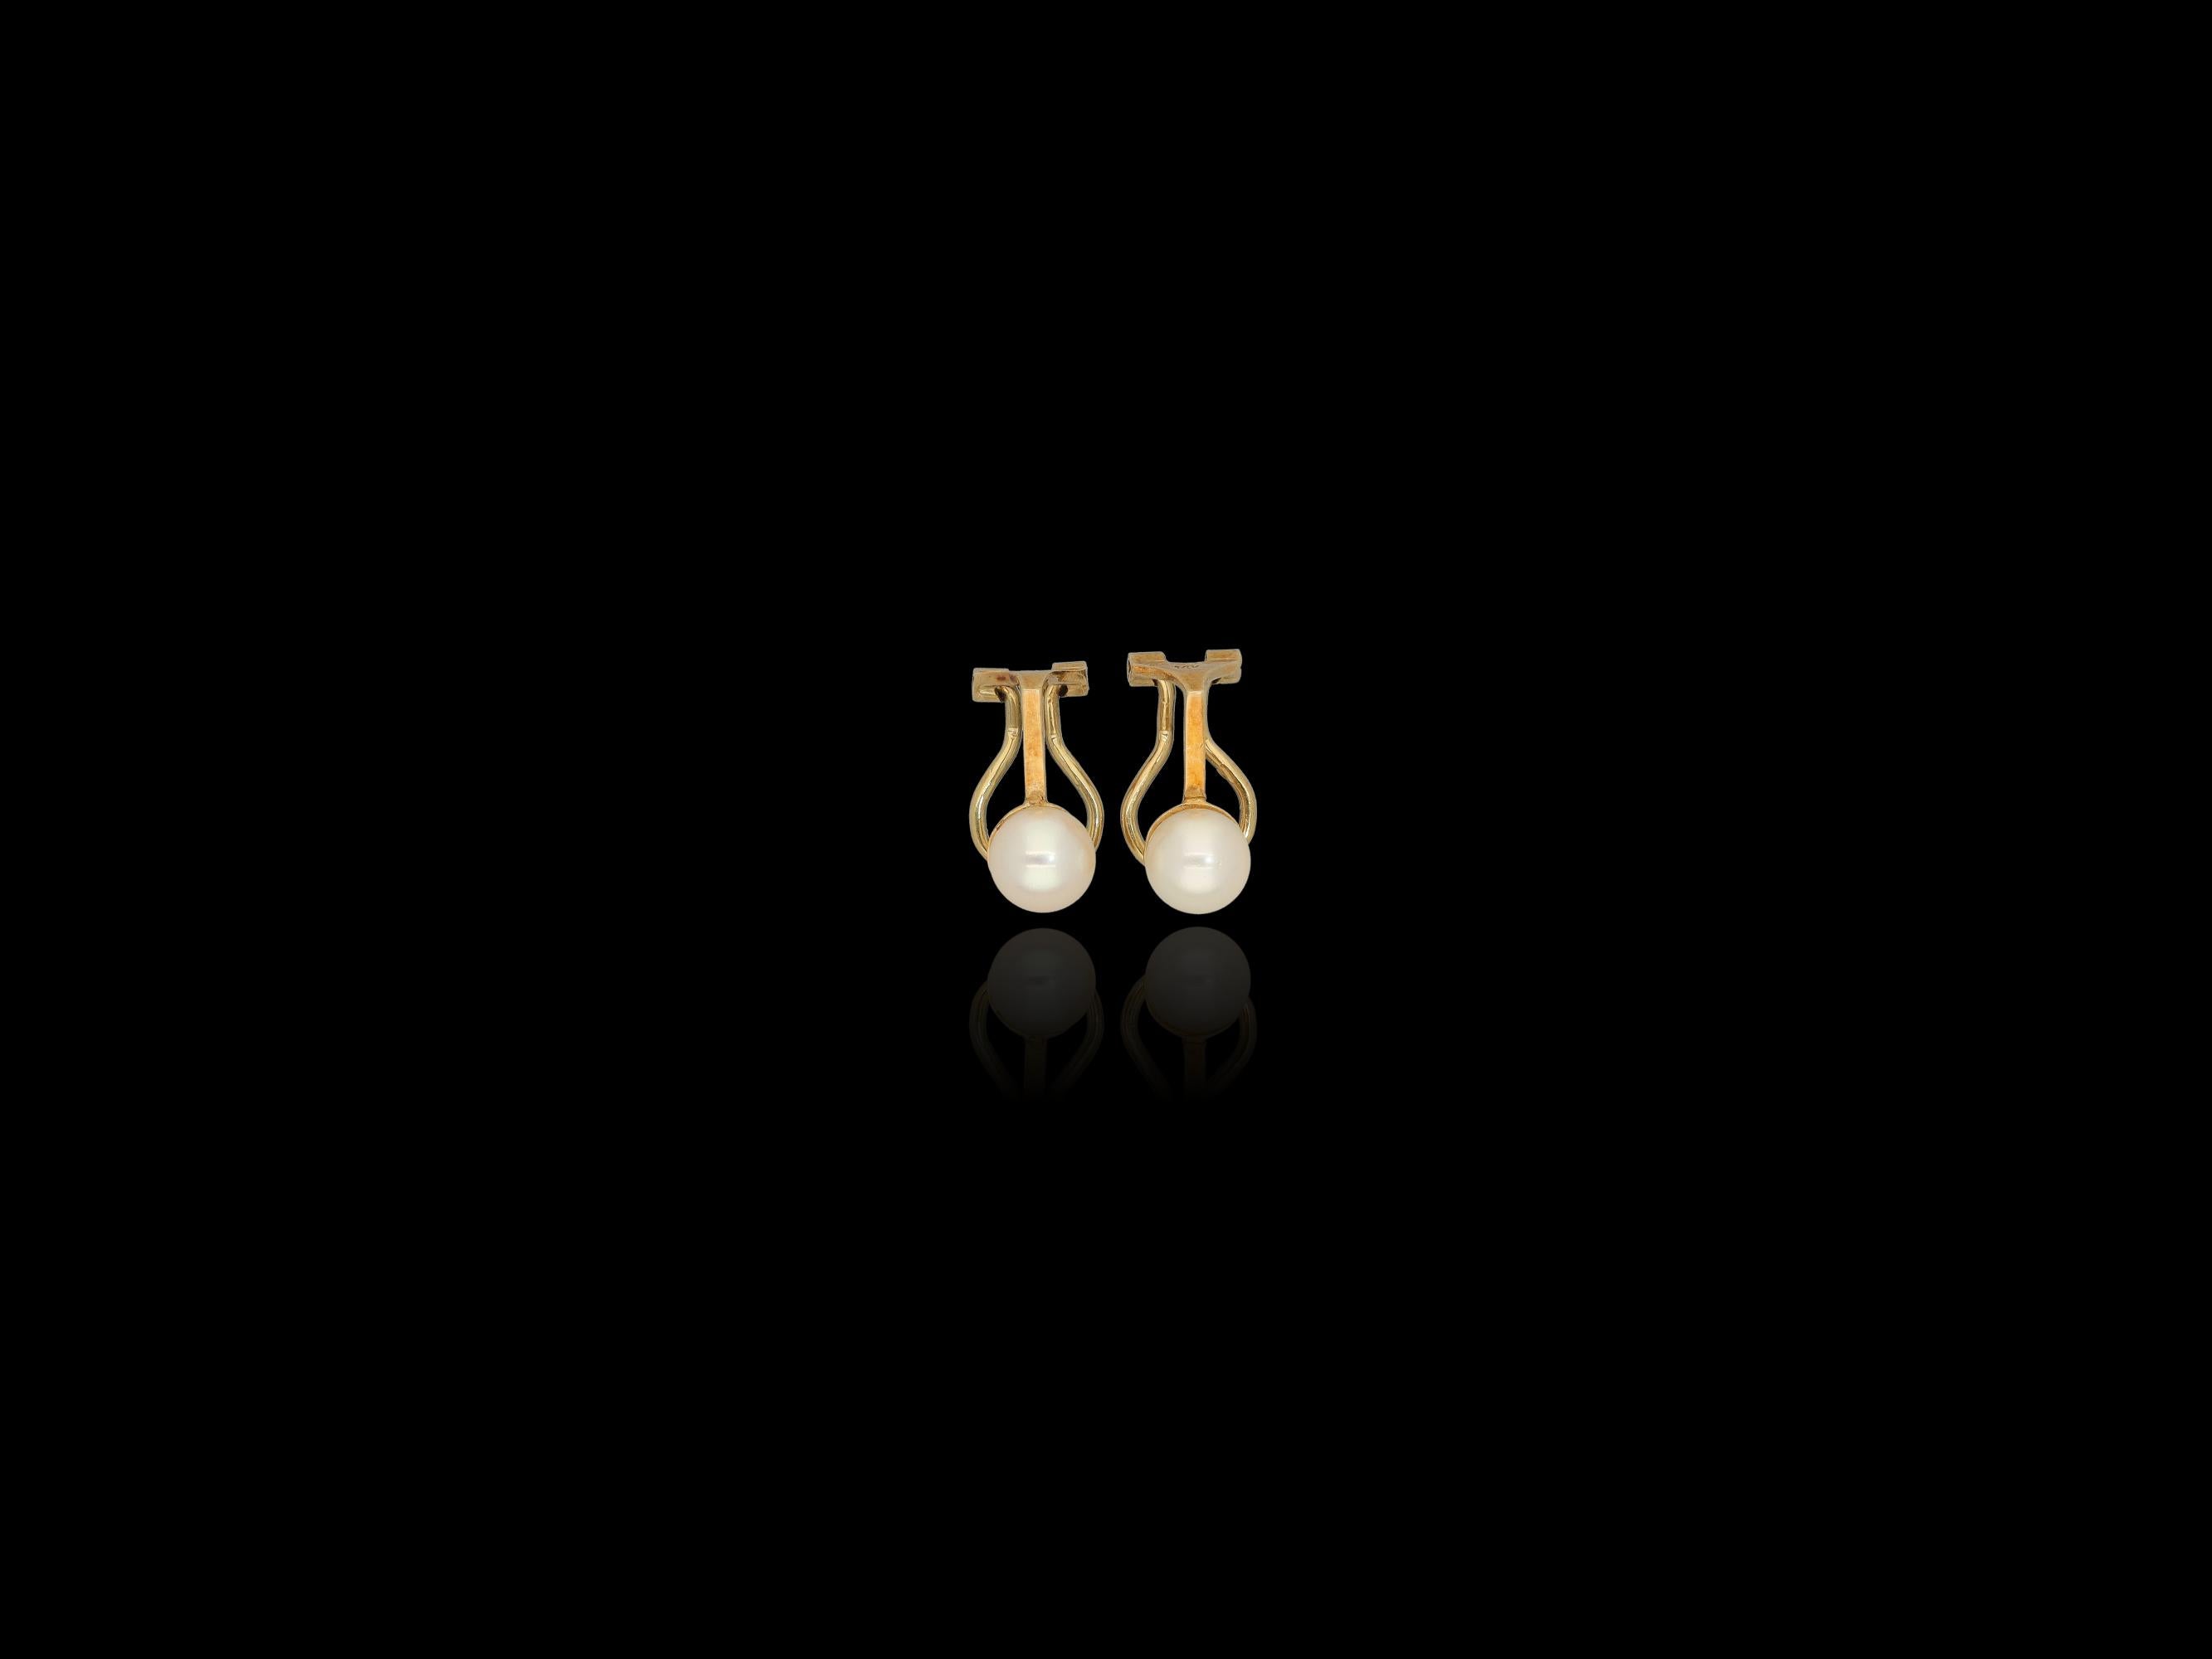 A lovely mid-centry pair od pearl clip on earrings. Made in solid 585 14k yellow gold, these classy earrins are made for non-pierced ears.
Origin: The Netherlands, mid-late 20th century;
Preserved in a perfect state with a tight clasp.

Details: